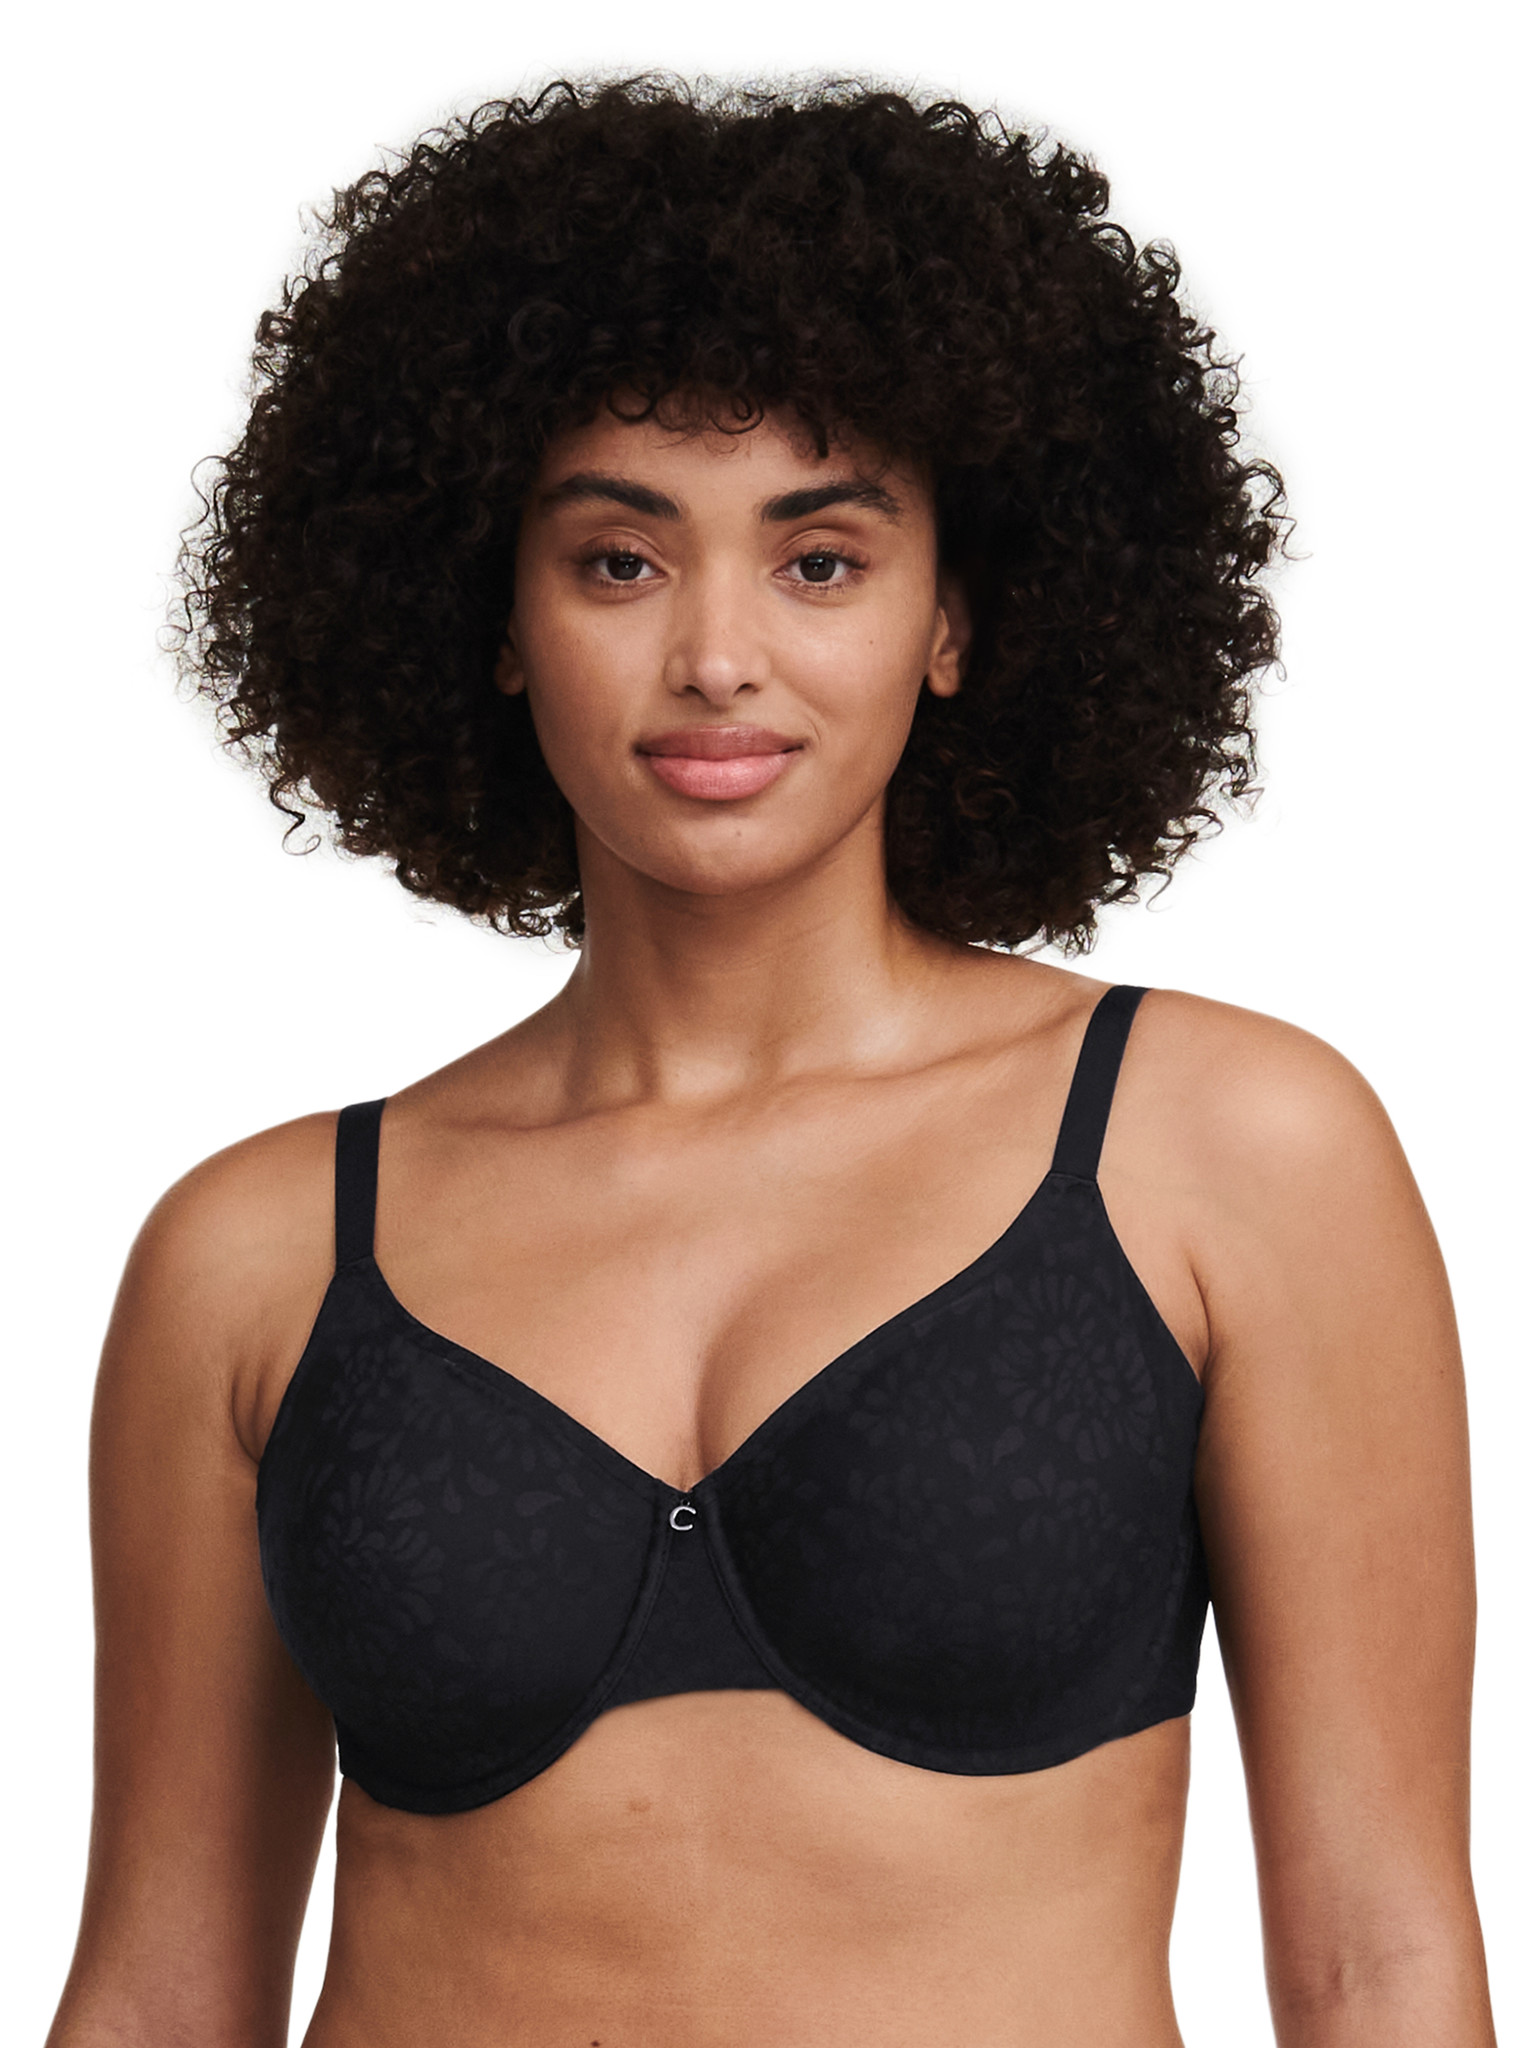 Women's Comfortable Minimizer Bras for Women with Back and Side